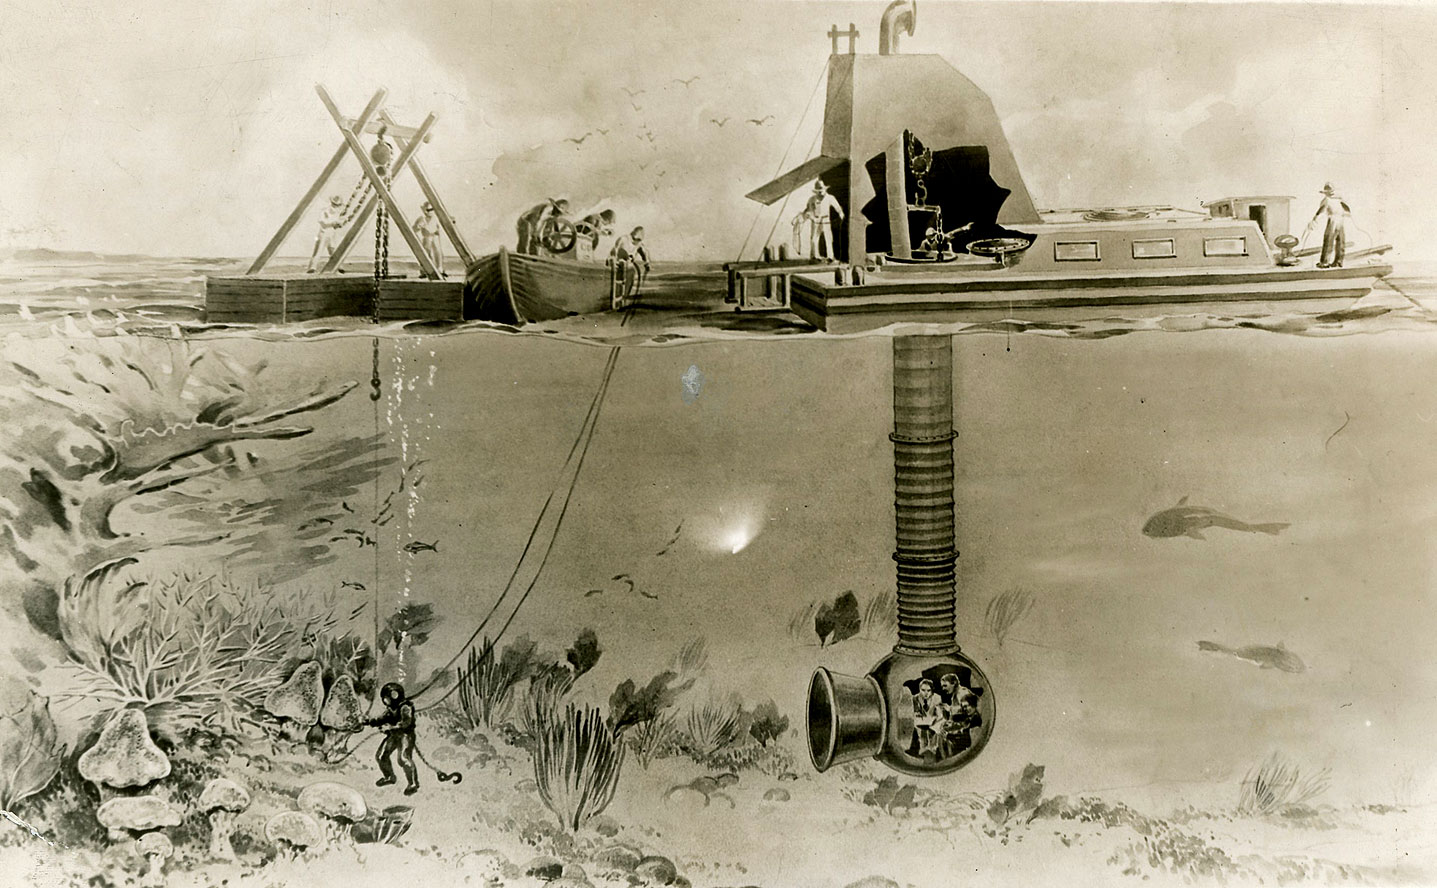 Early Underwater Photography